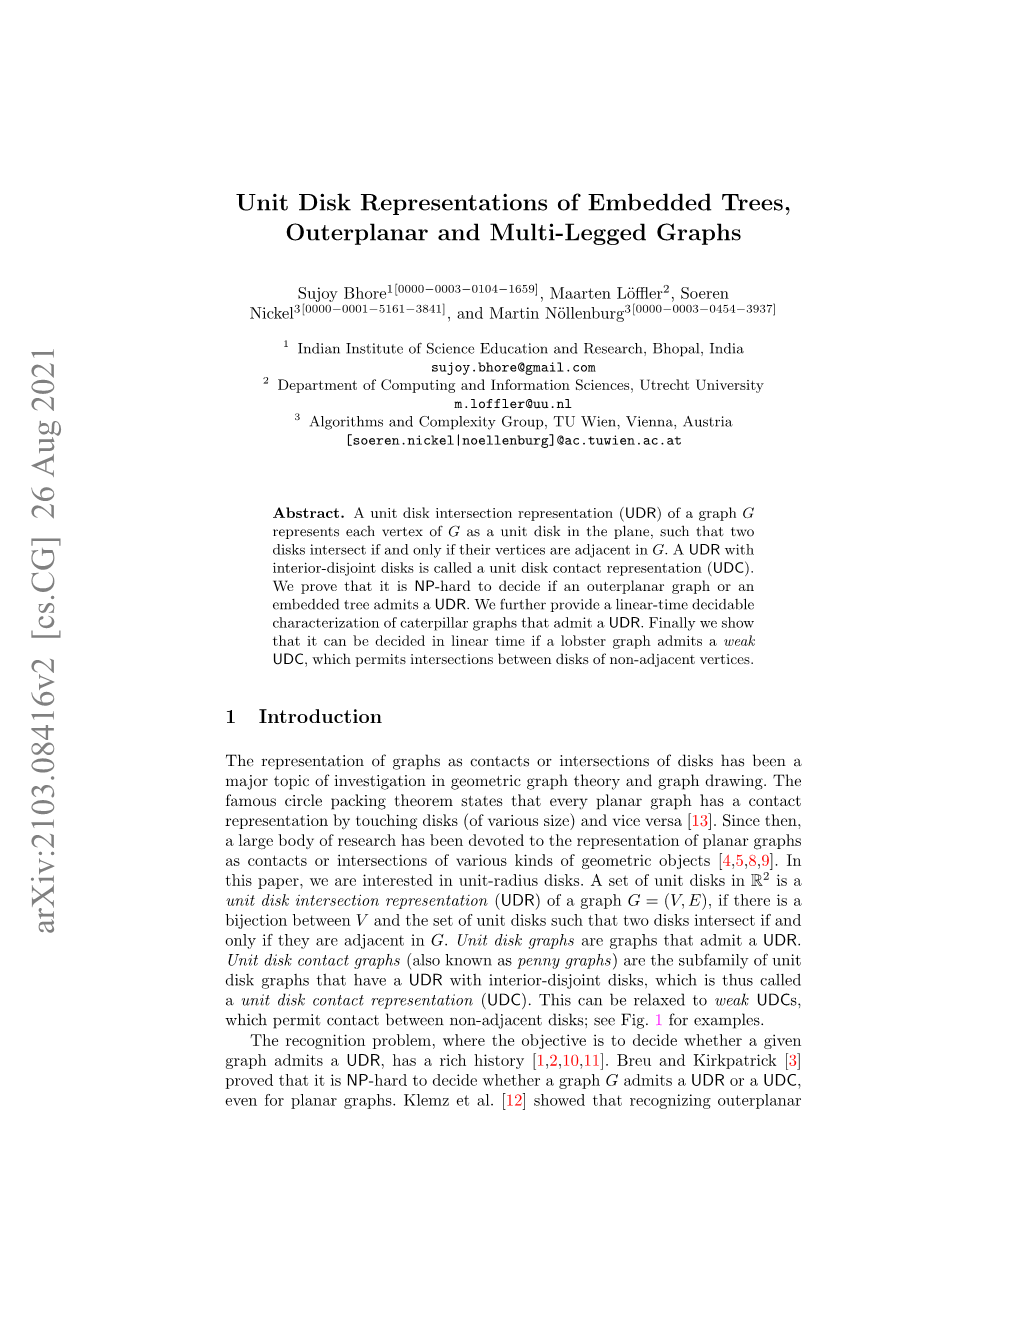 Recognition of Unit Disk Graphs for Caterpillars, Embedded Trees, and Outerplanar Graphs